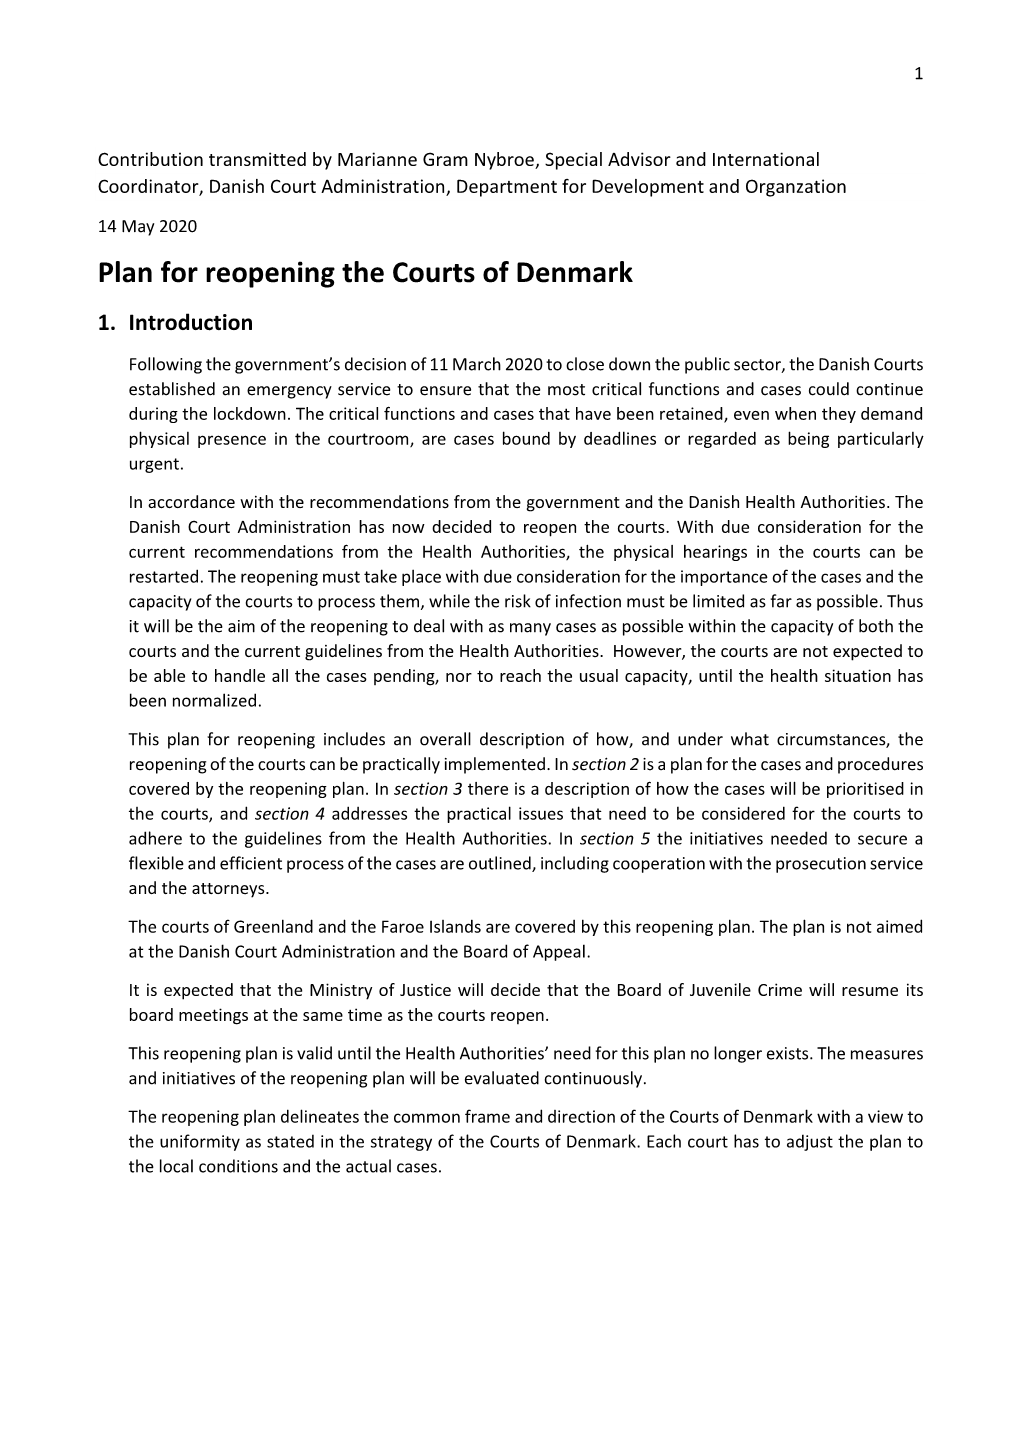 Plan for Reopening the Courts of Denmark 1